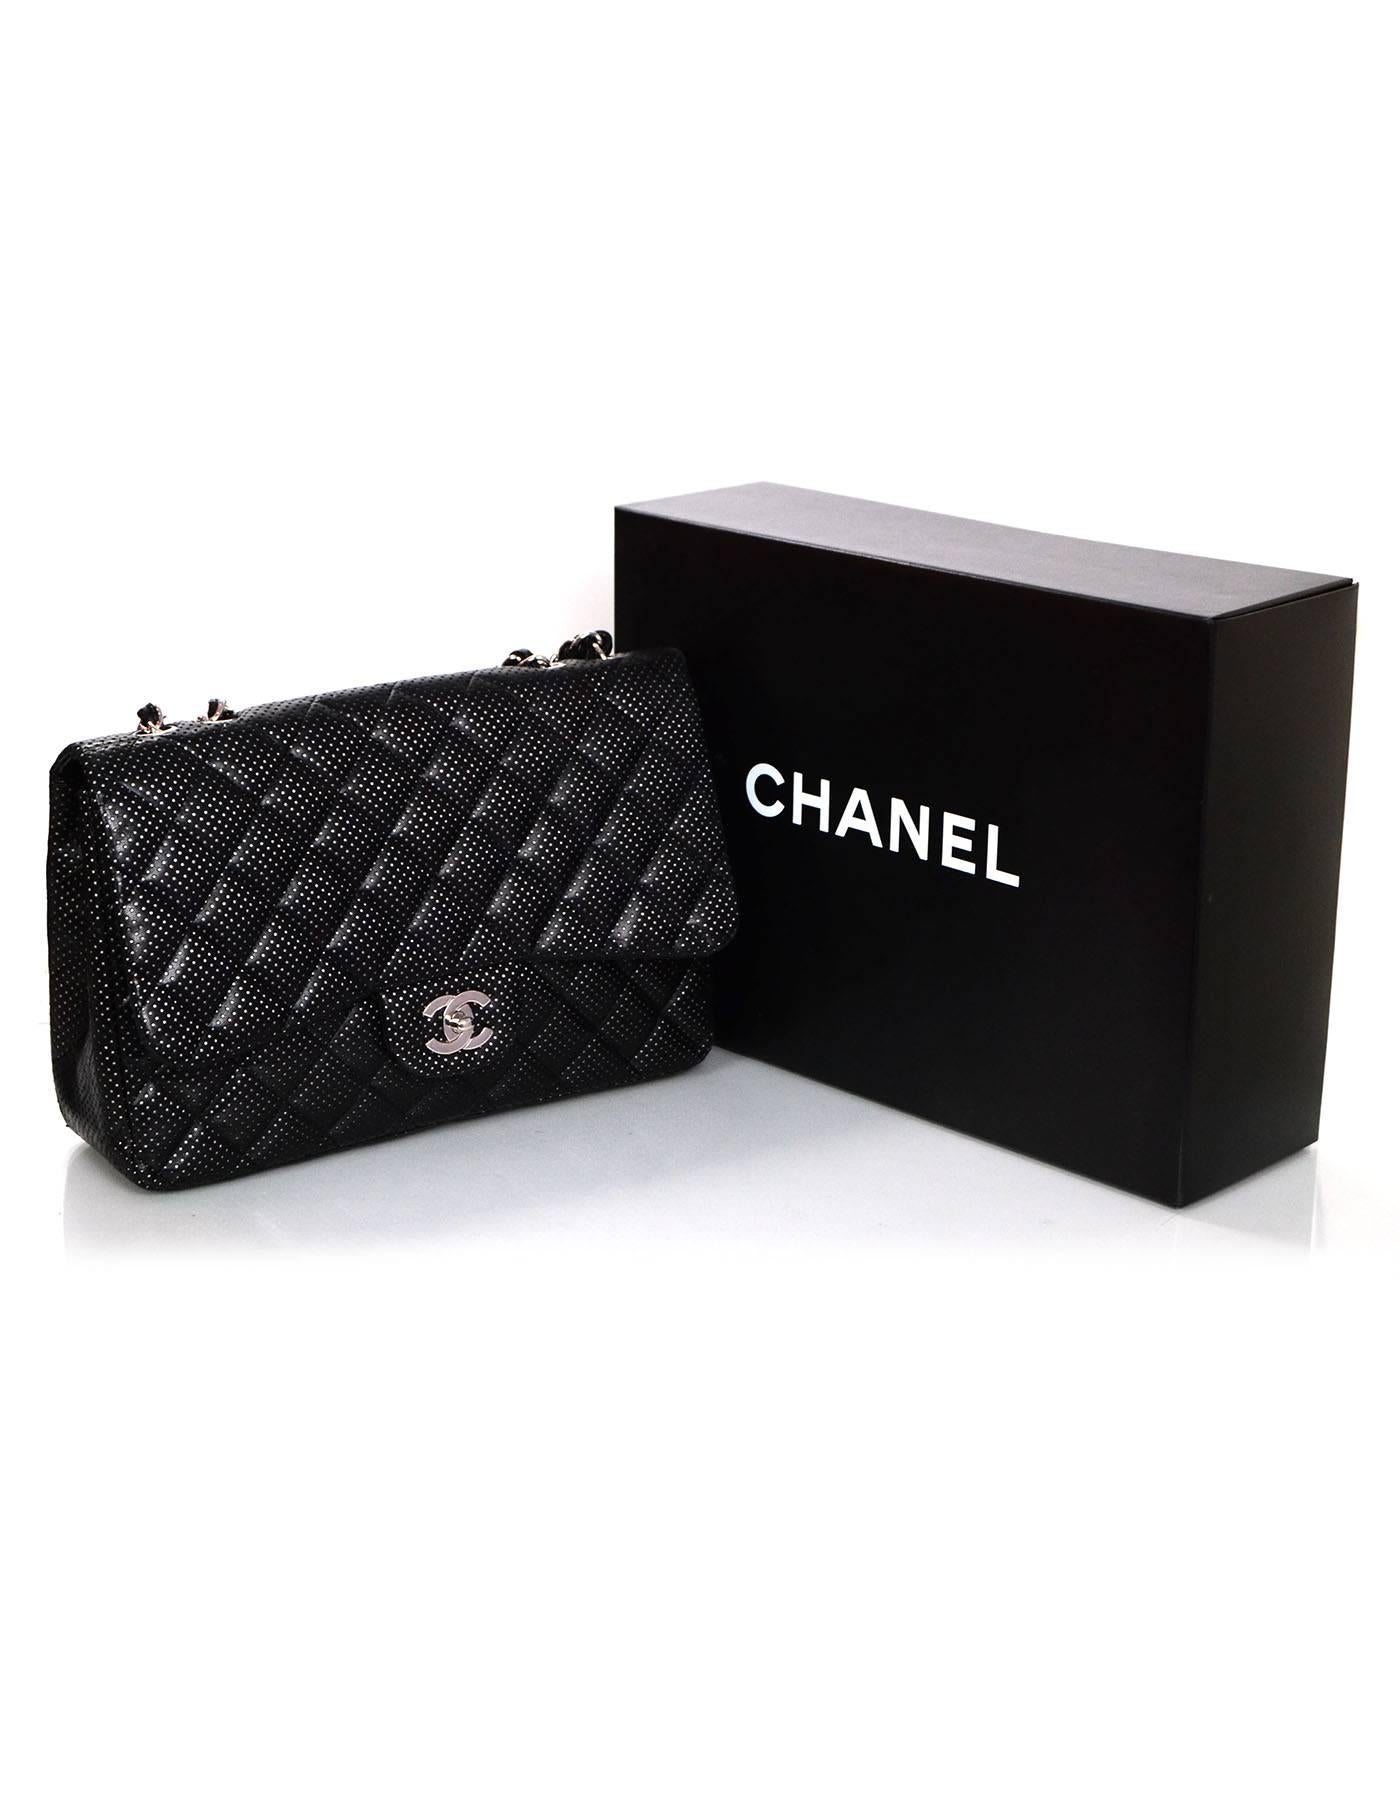 Chanel Black Perforated Jumbo Quilted Classic Flap Bag SHW 3